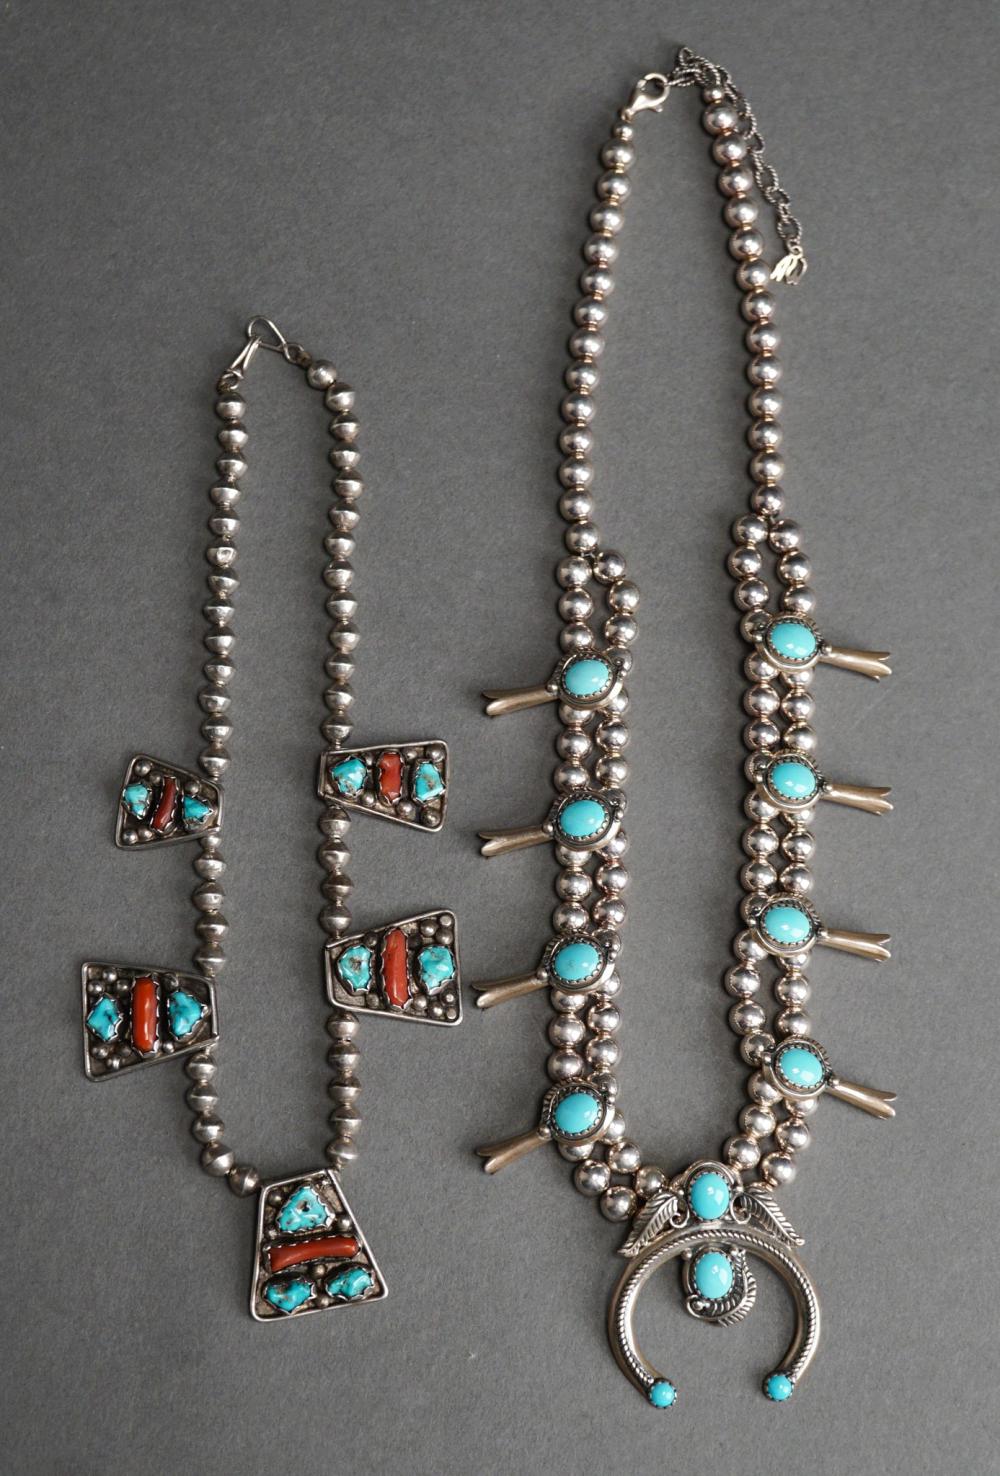 SOUTHWEST SILVER AND TURQUOISE